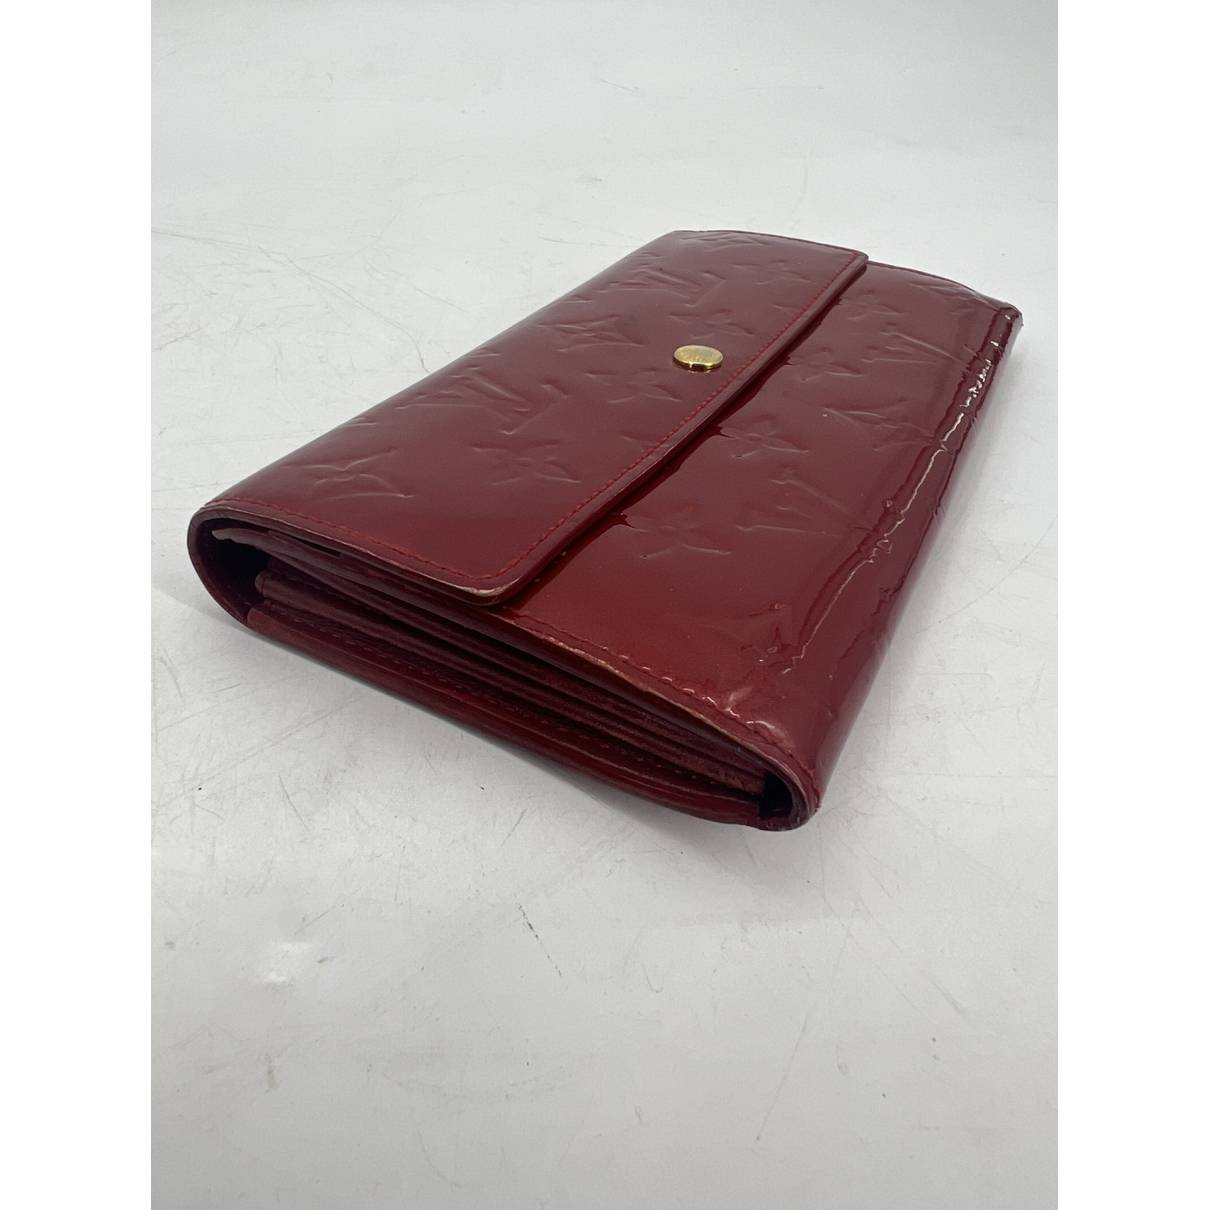 Louis Vuitton - Authenticated Sarah Wallet - Patent Leather Red for Women, Good Condition